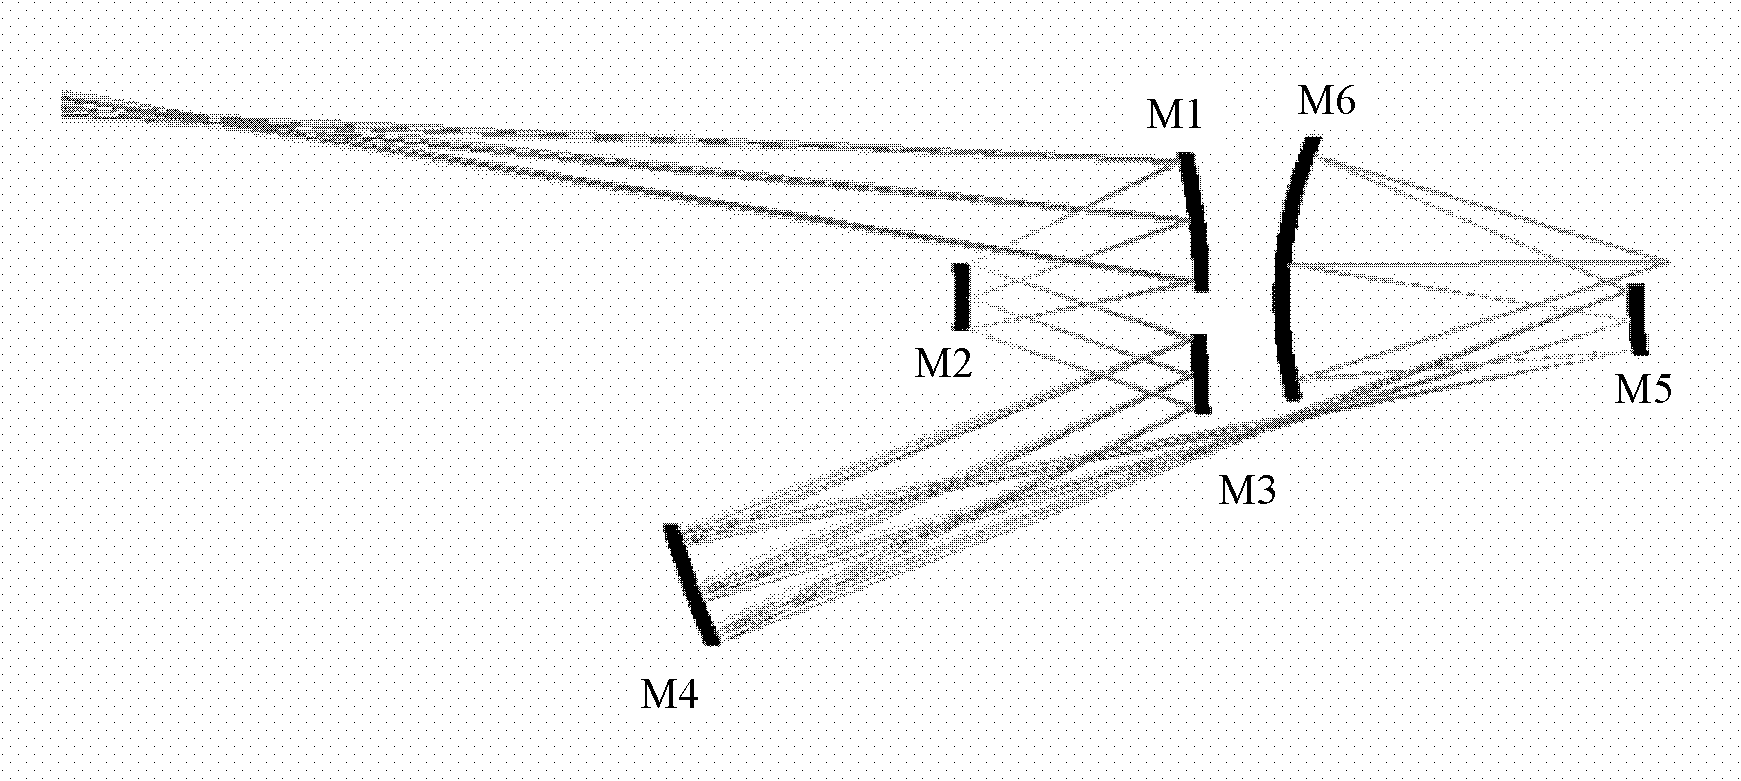 Projection objective structural optimization method for reducing deformation of extreme ultra-violet lithography system